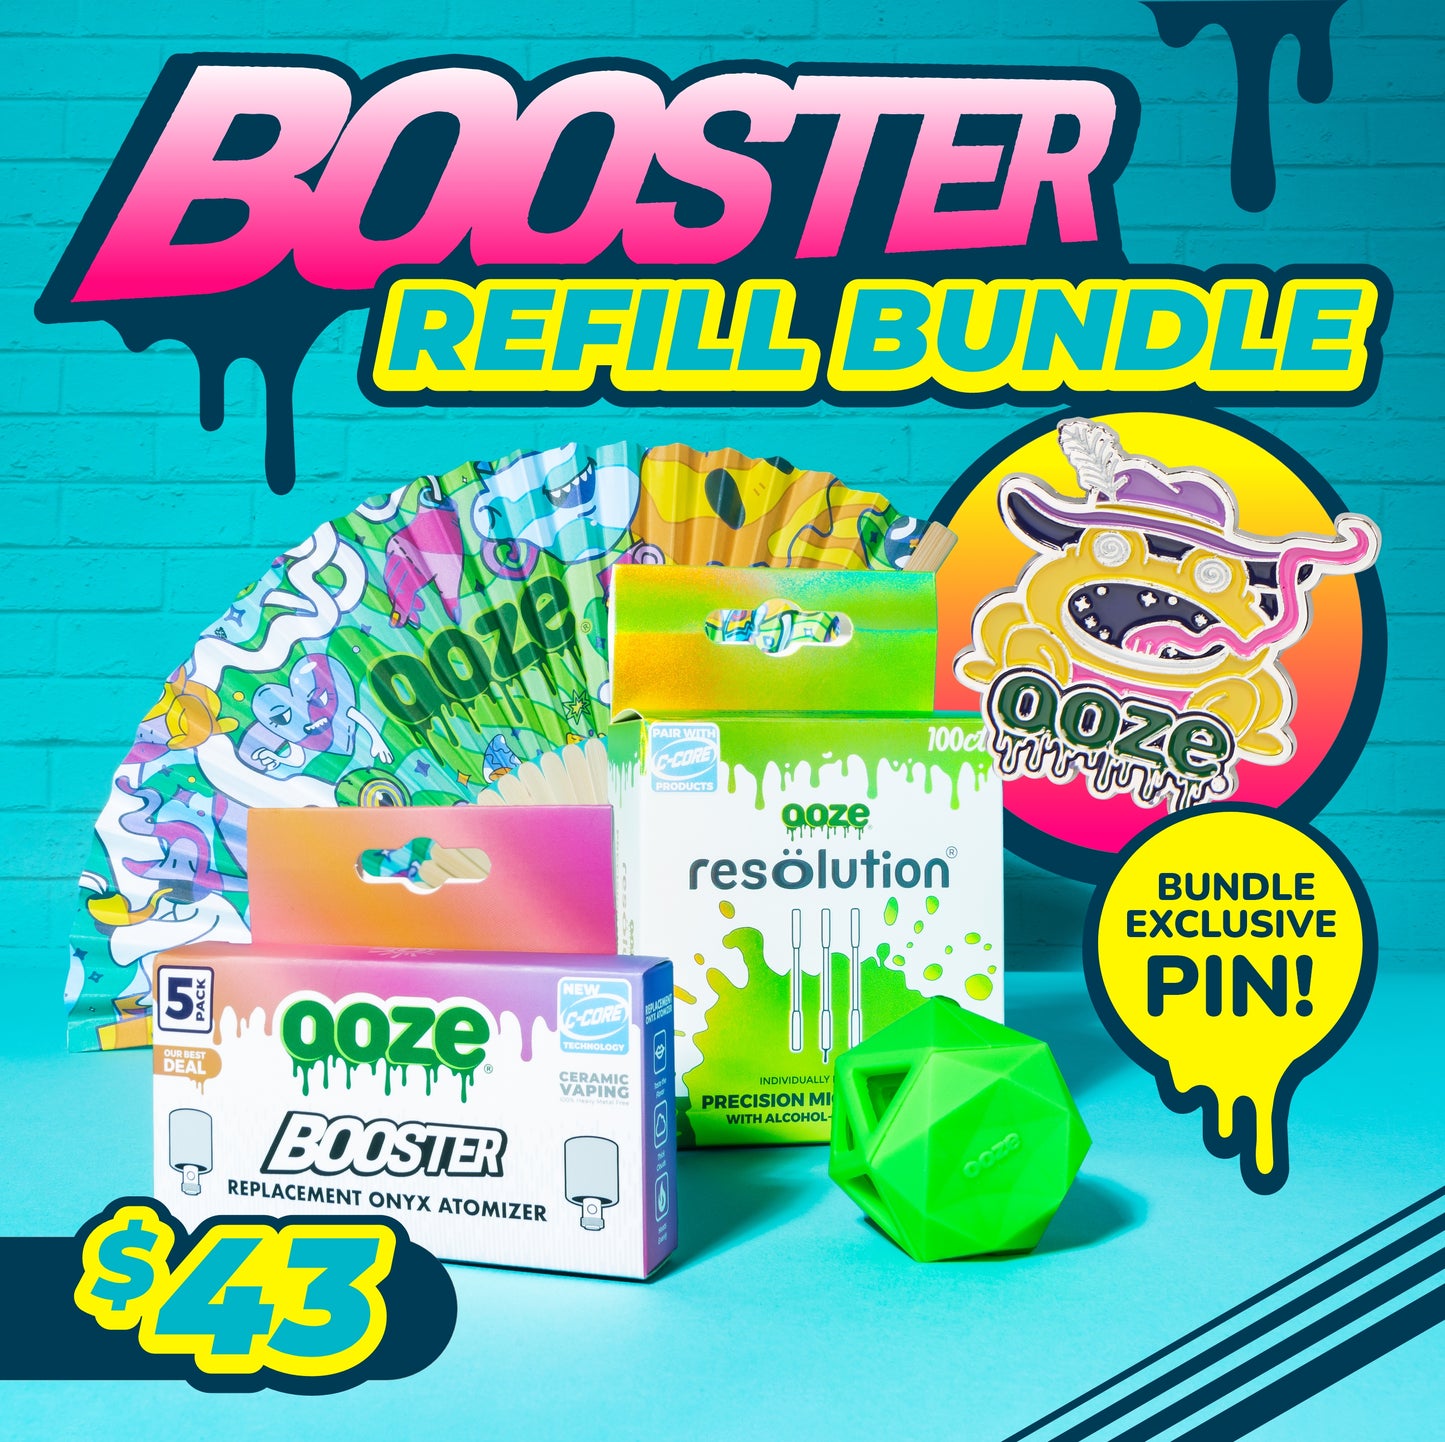 The Booster Refill Bundle graphic shows the bundle's contents and a $43 bubble